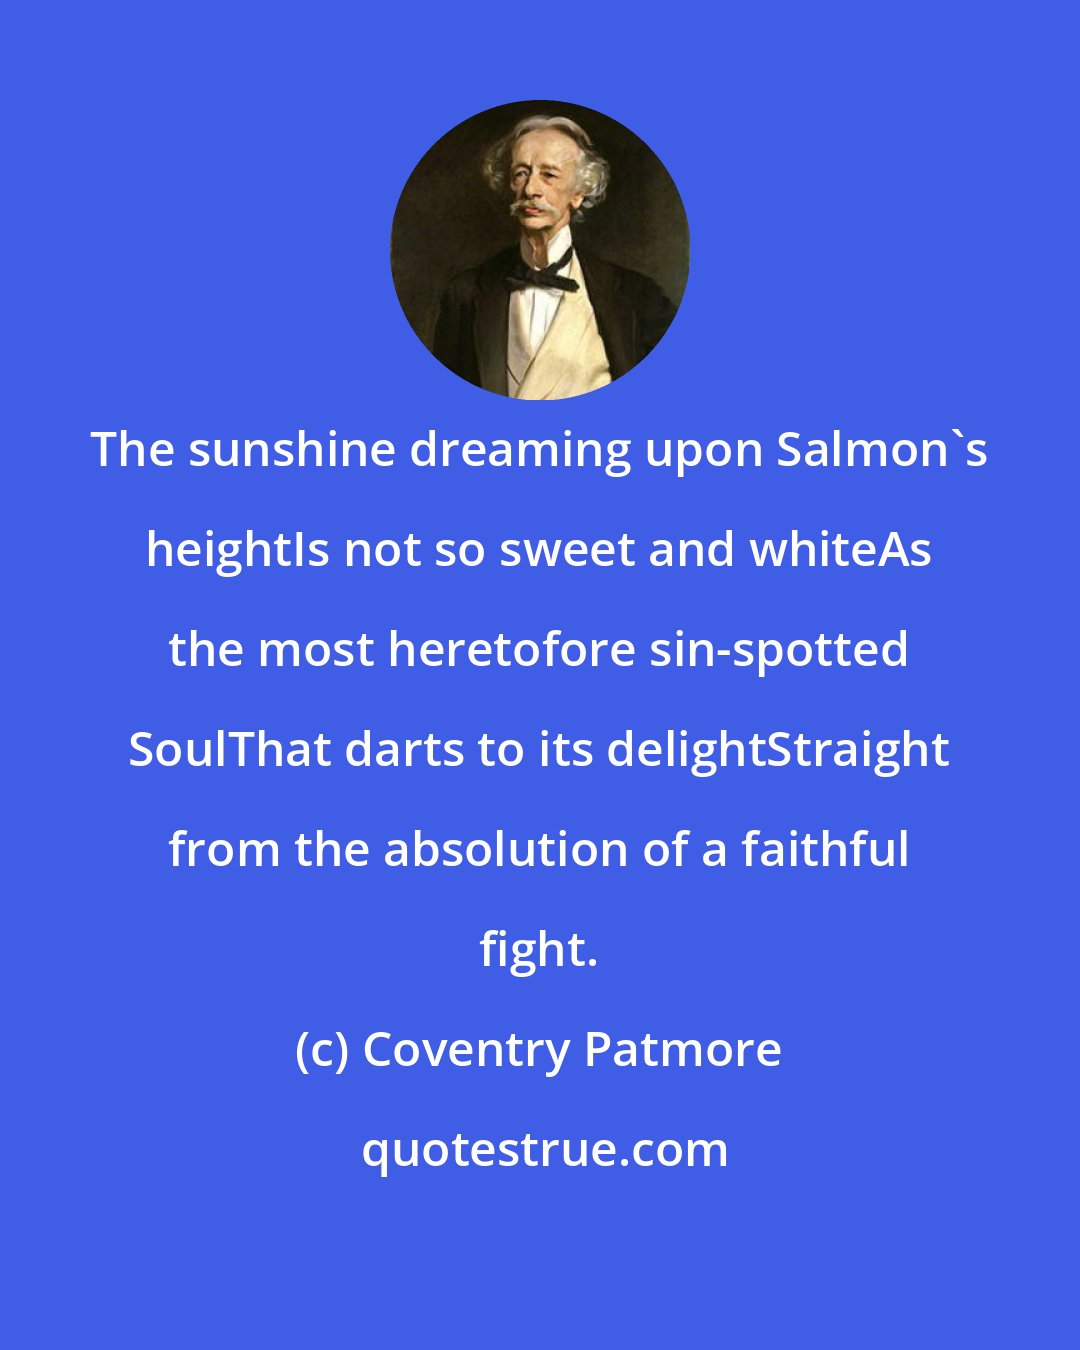 Coventry Patmore: The sunshine dreaming upon Salmon's heightIs not so sweet and whiteAs the most heretofore sin-spotted SoulThat darts to its delightStraight from the absolution of a faithful fight.